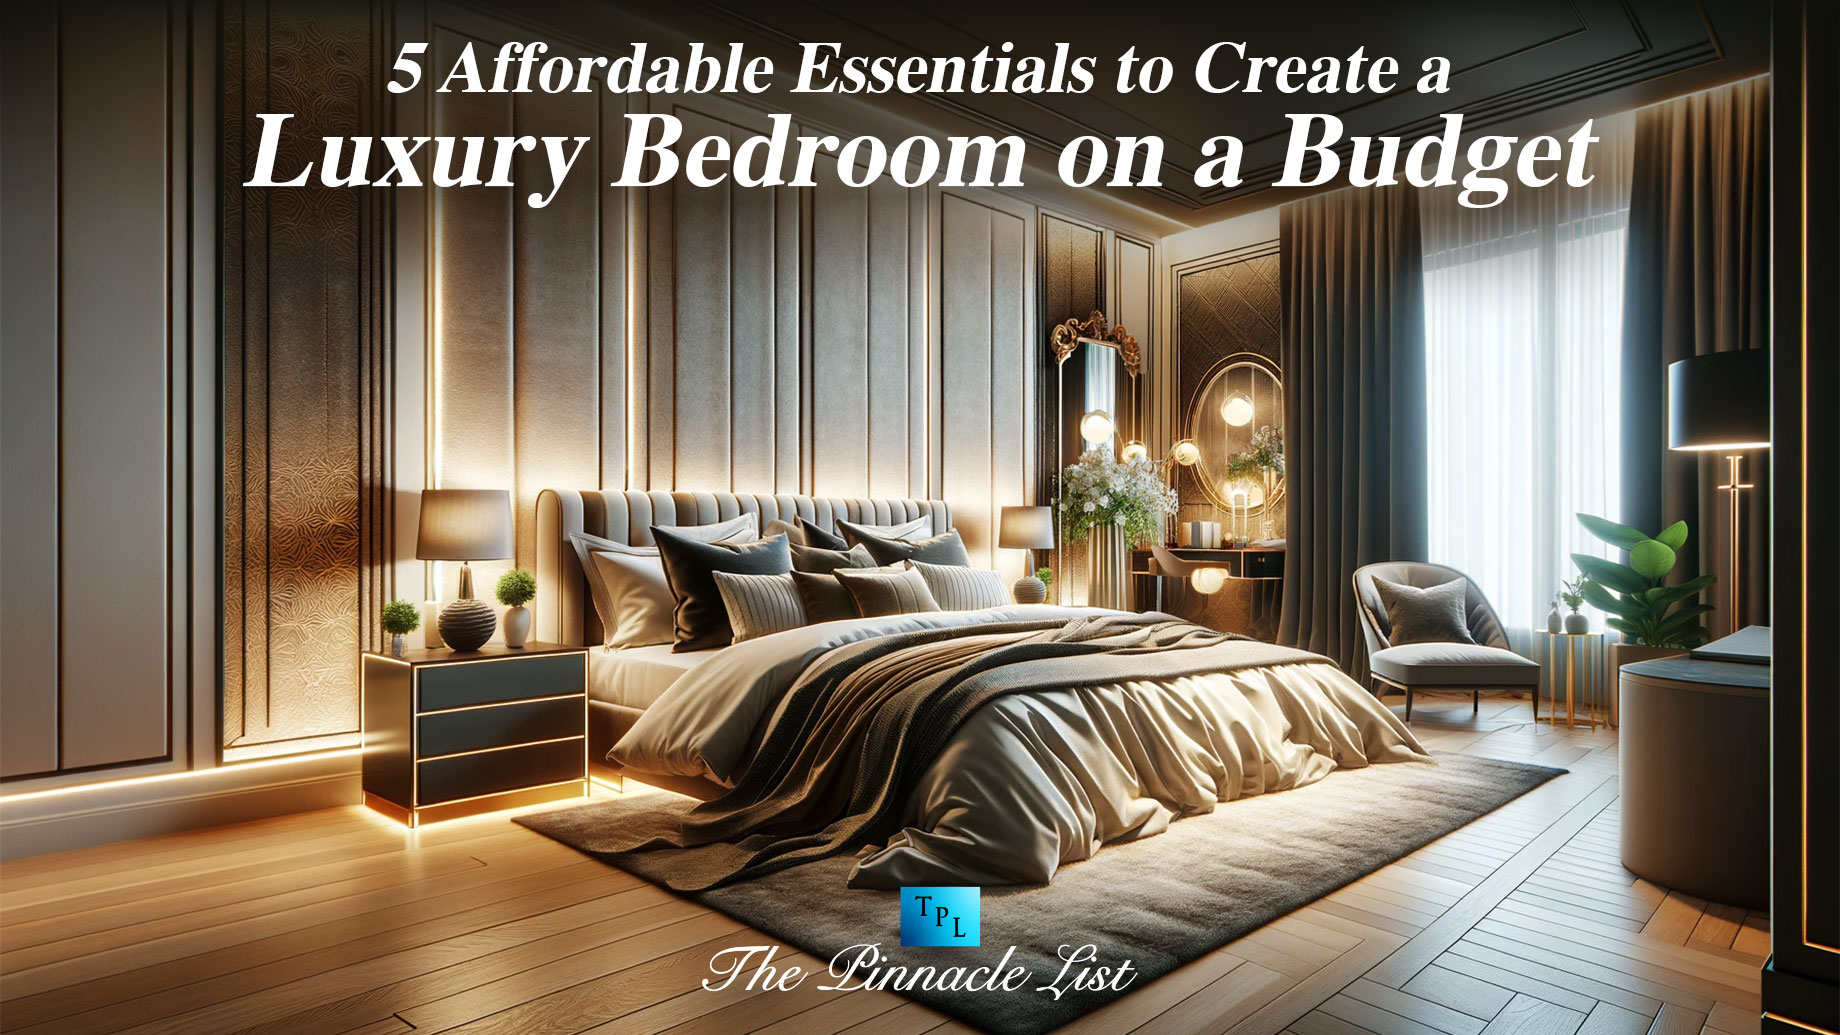 5 Affordable Essentials to Create a Luxury Bedroom on a Budget